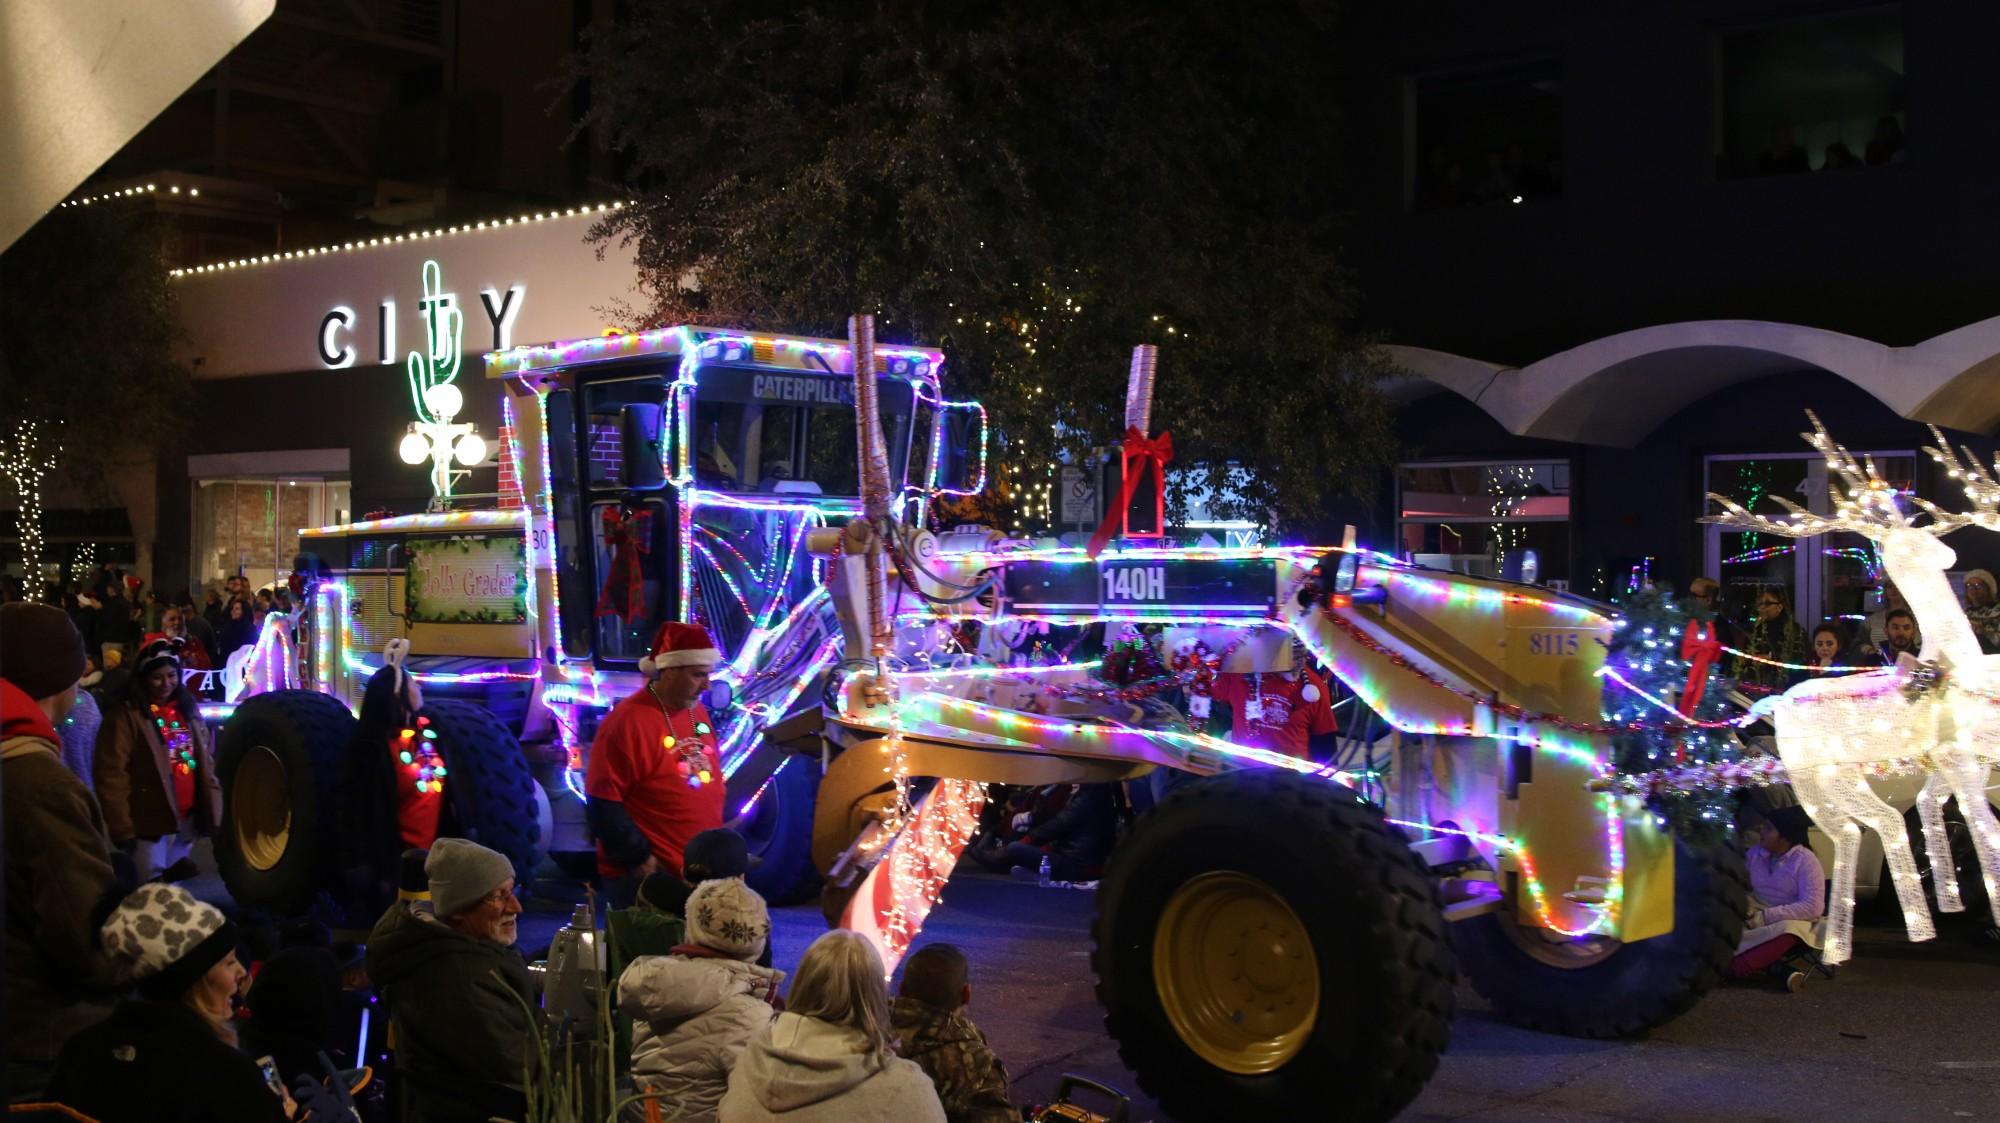 "The Jolly Grader”, a decorated Caterpillar truck, was one of more than 50 entries hoping to win an award in this year’s parade. A panel of judges were present at the parade, judging each float or vehicle based on different decorative factors.